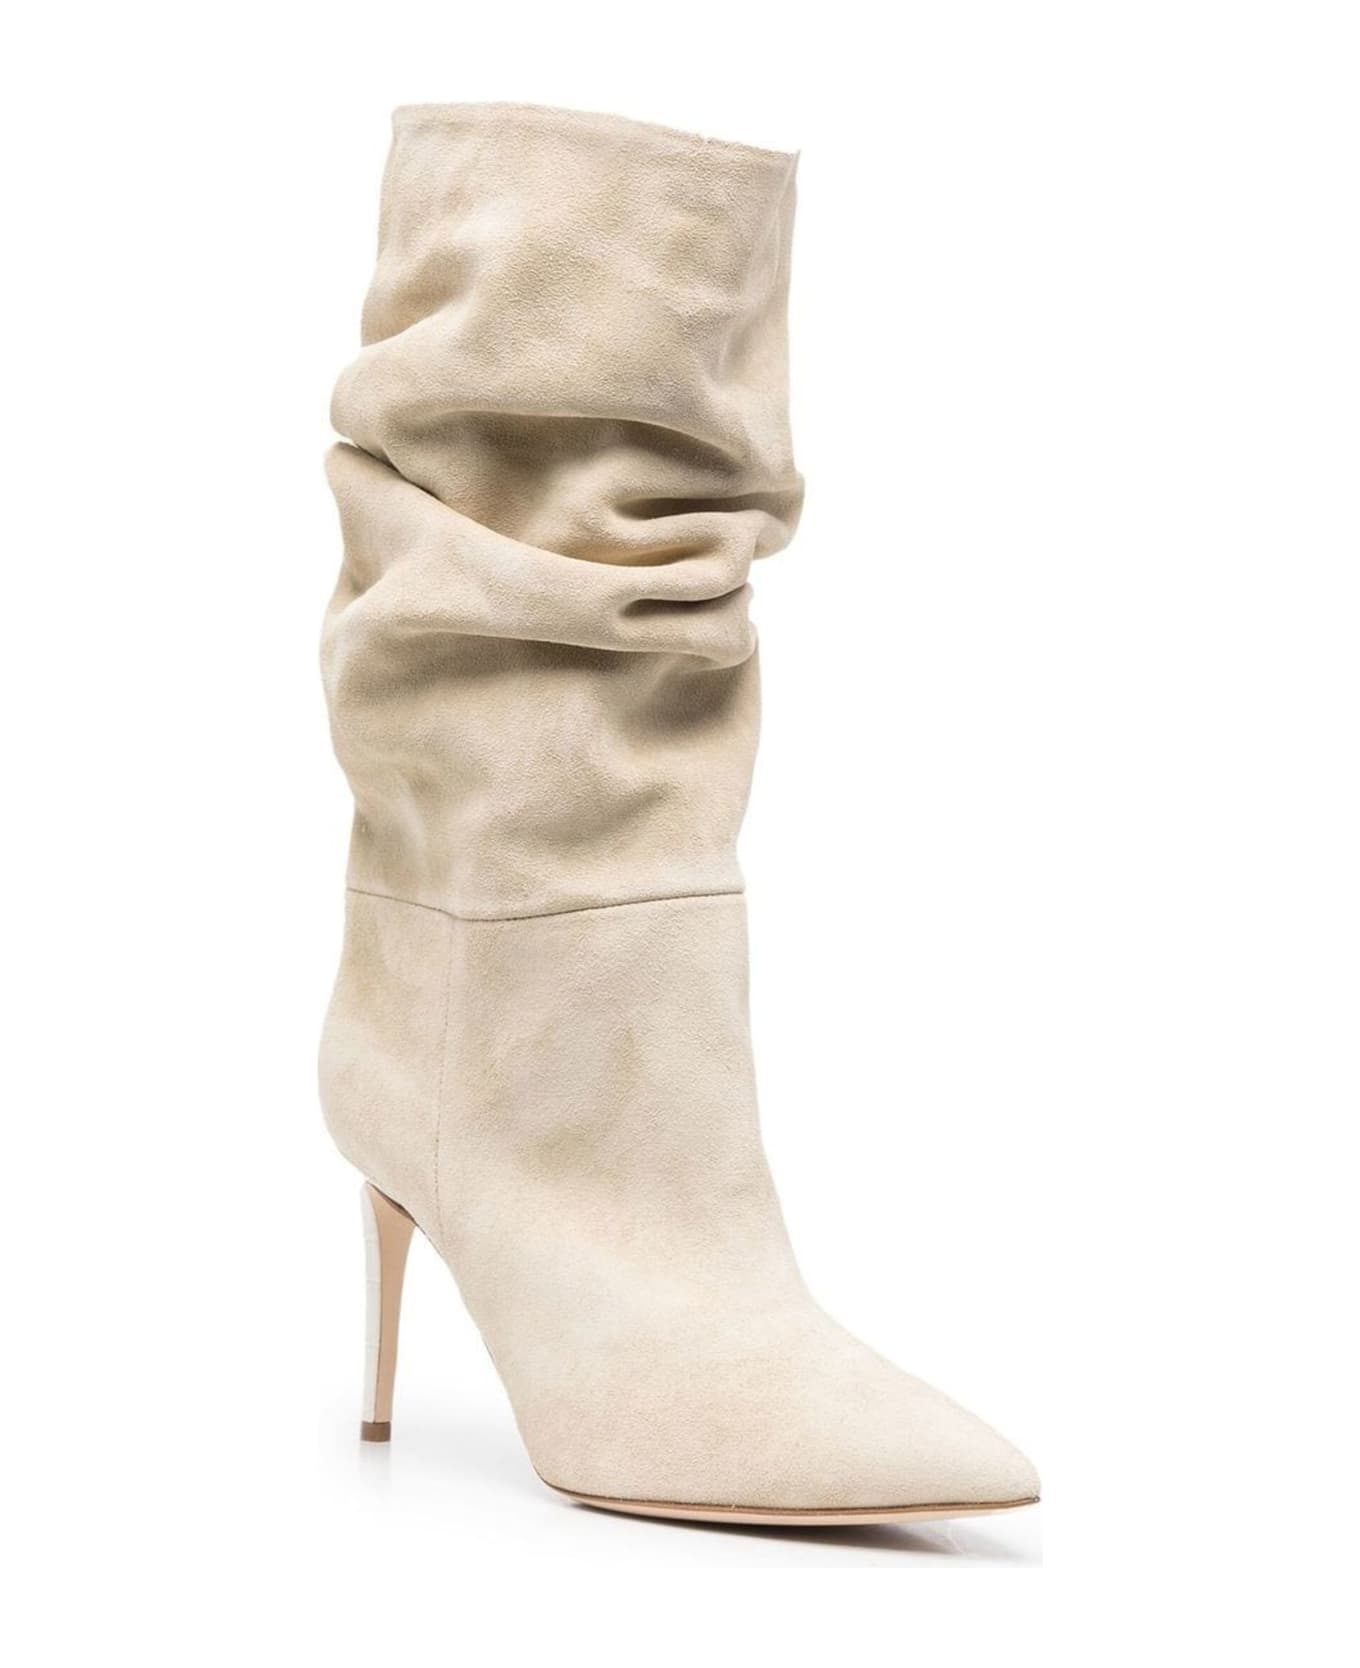 Paris Texas Beige Calf Leather Suede Ankle Boots - Beige ブーツ